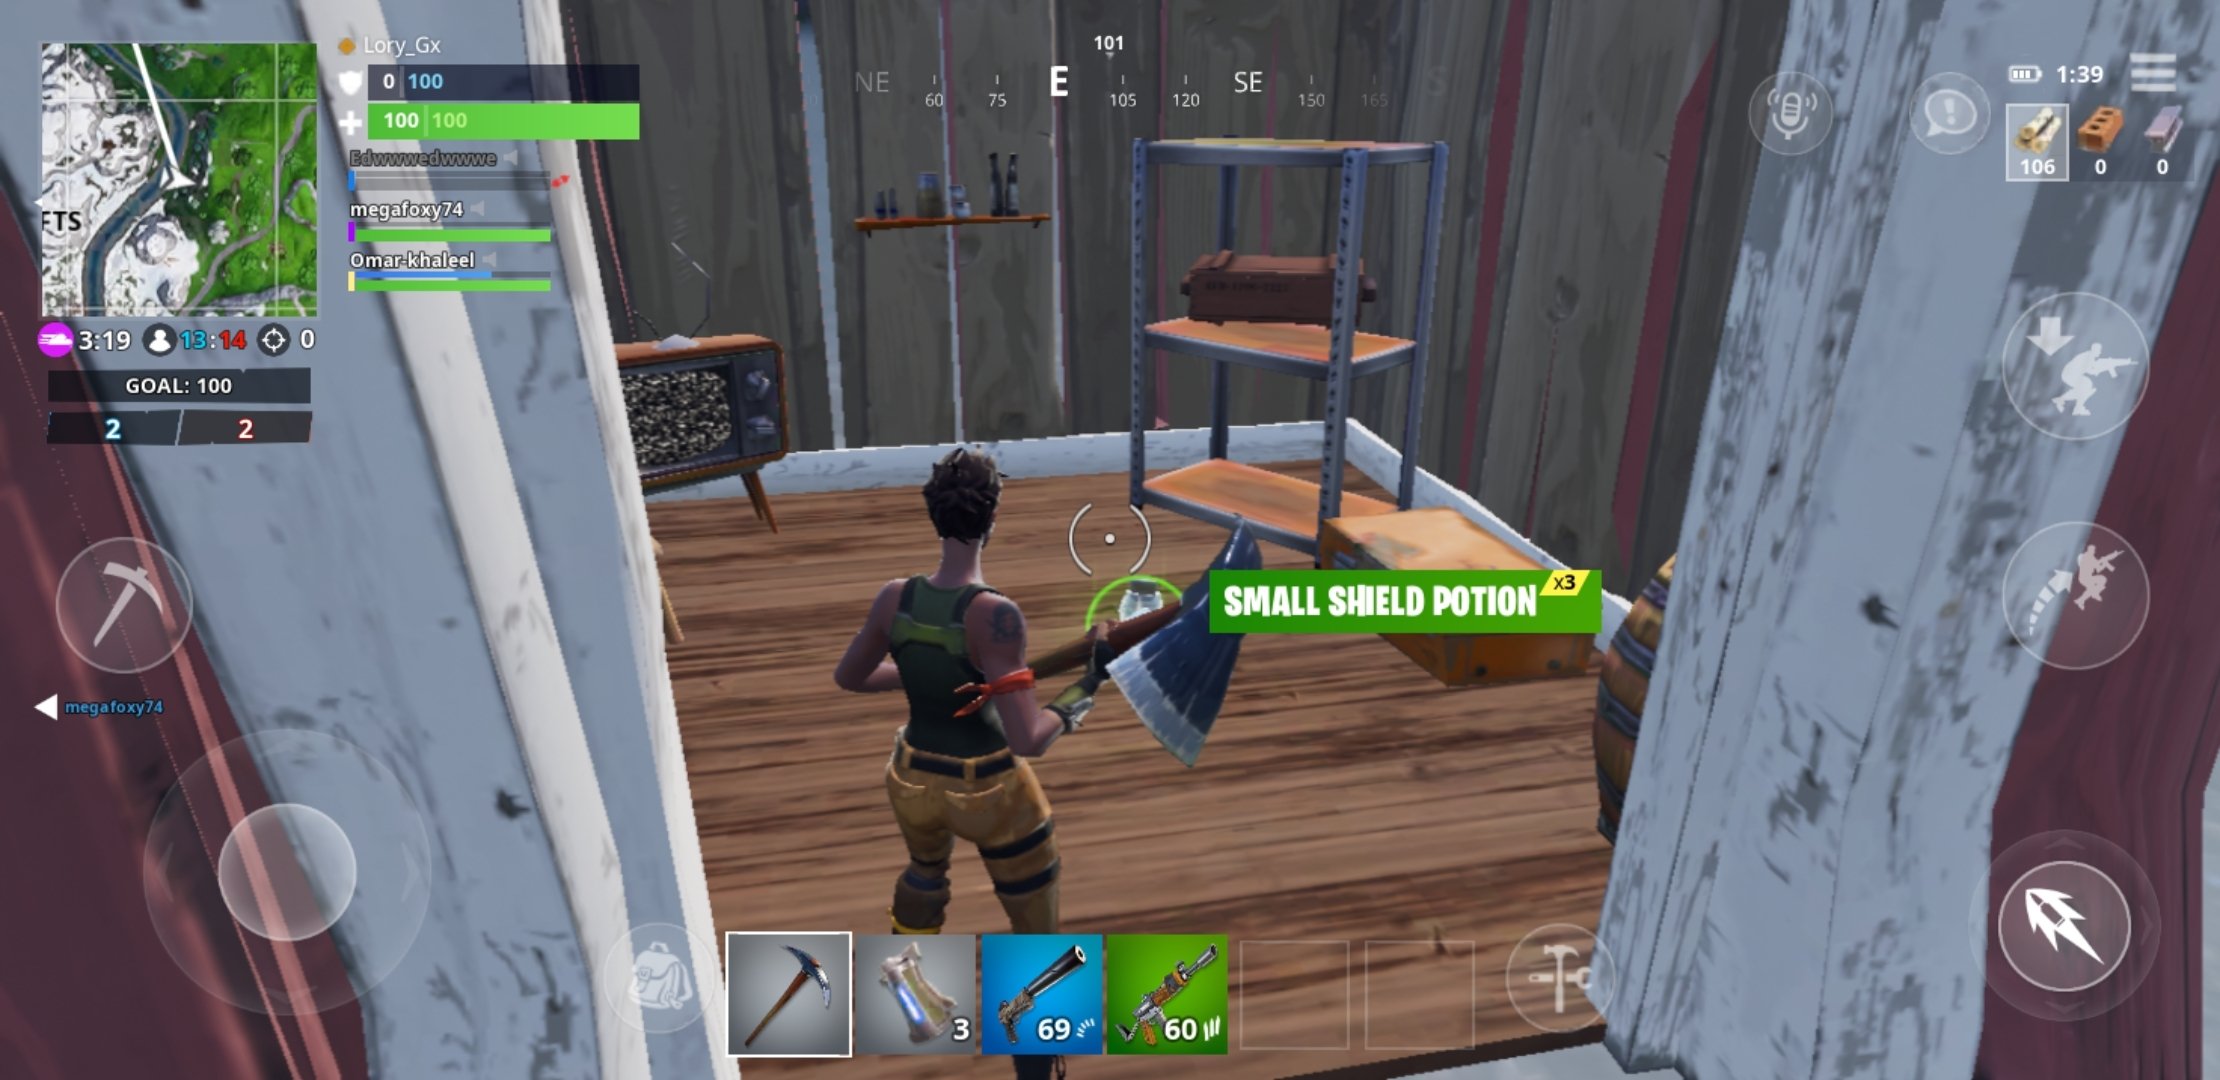 Fortnite 10 20 0 8456527 Telecharger Pour Android Apk - 